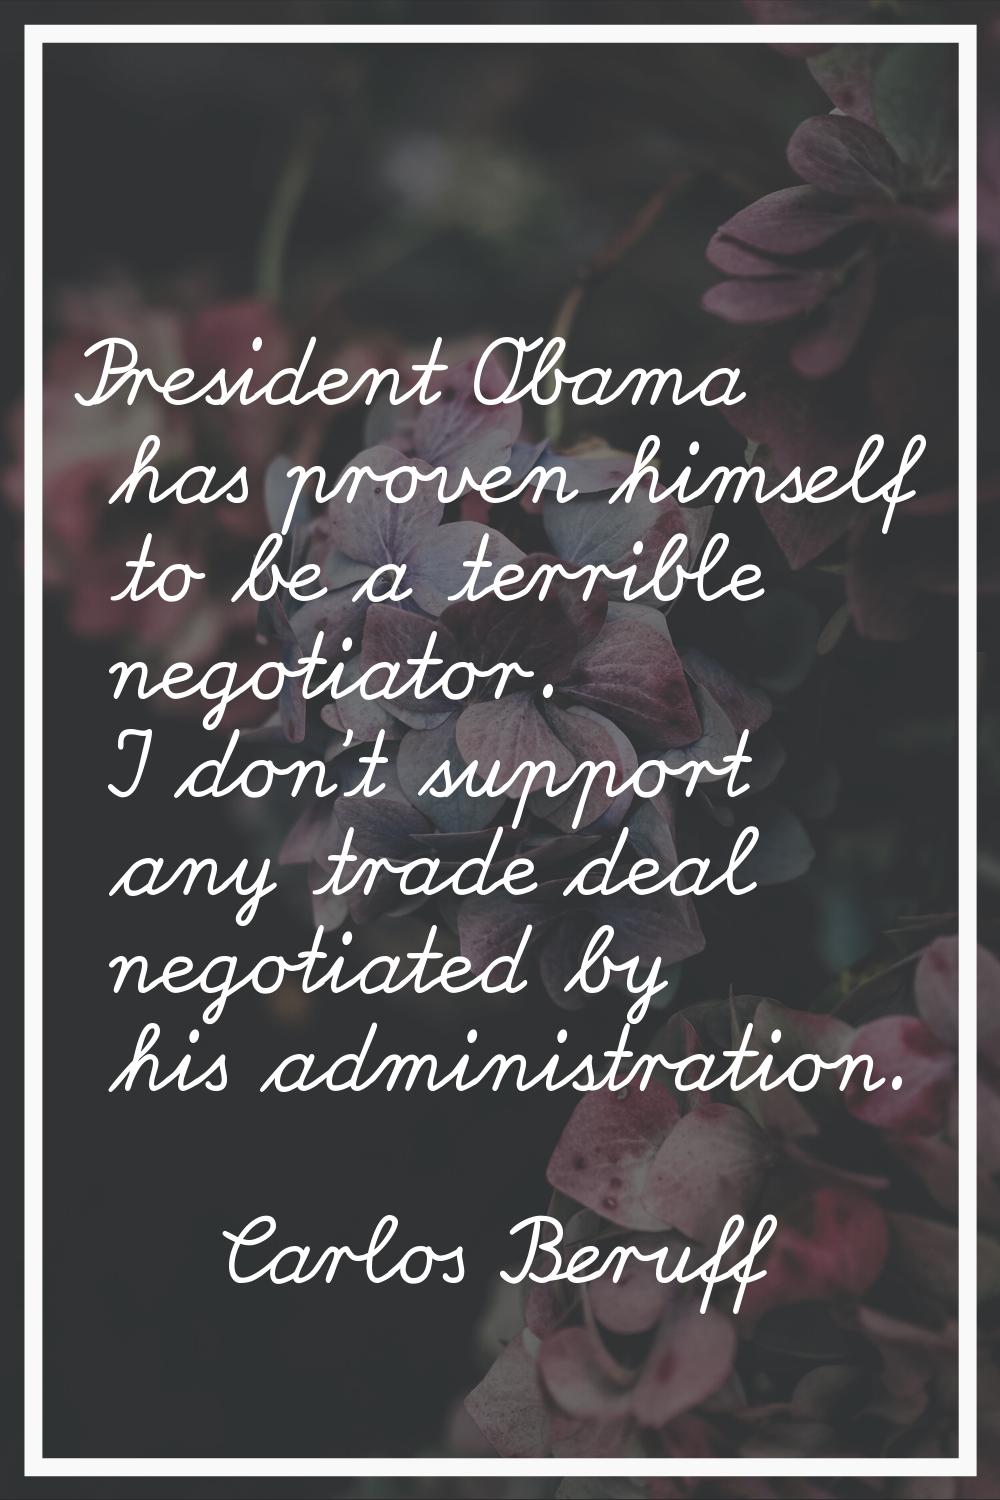 President Obama has proven himself to be a terrible negotiator. I don't support any trade deal nego